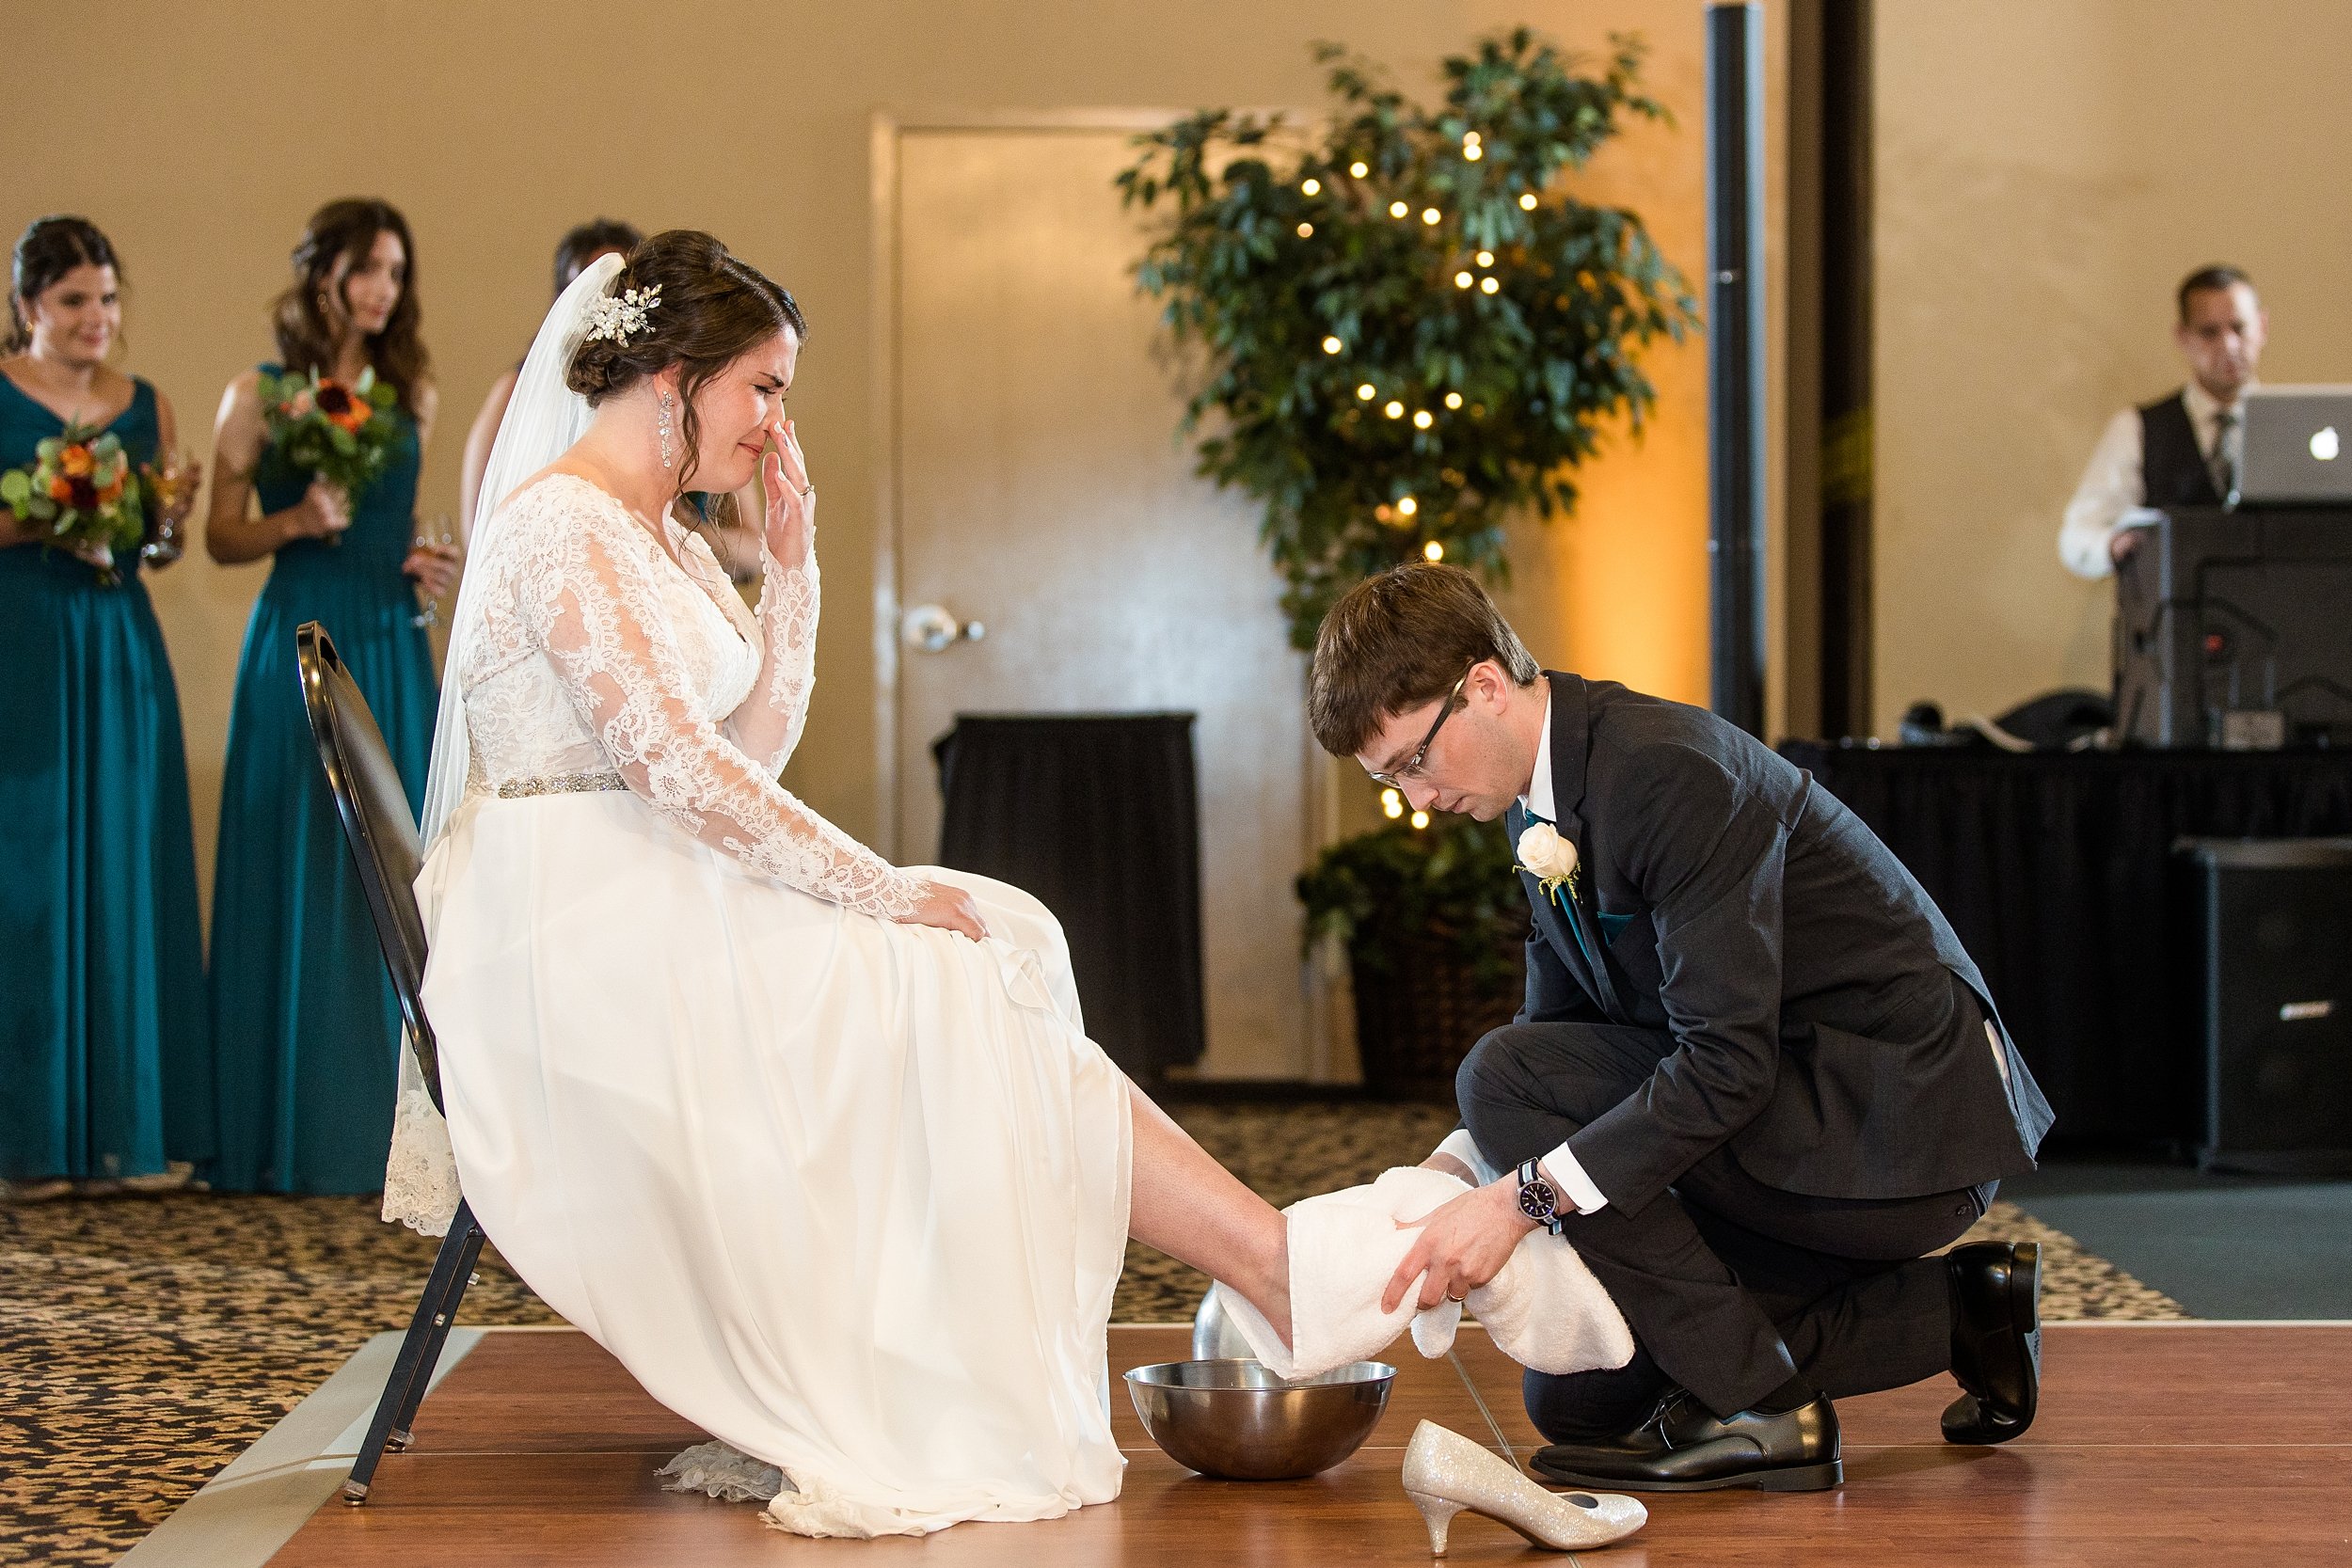  This foot washing ceremony was so sweet, and so emotional. 